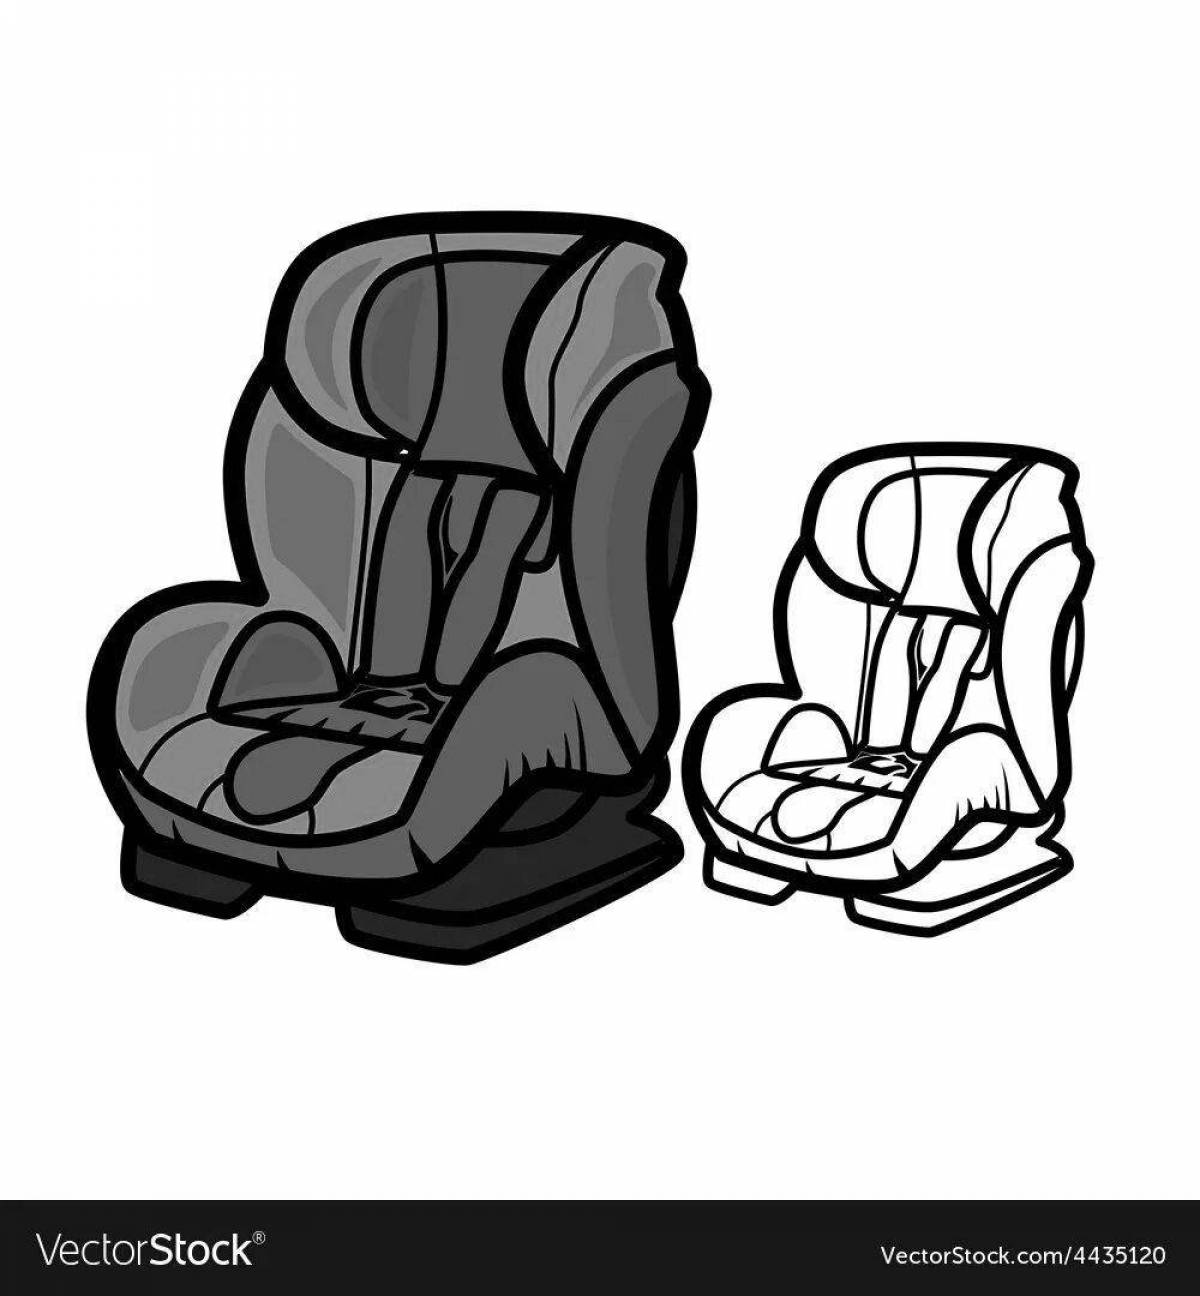 Inspirational car seat coloring book for kids